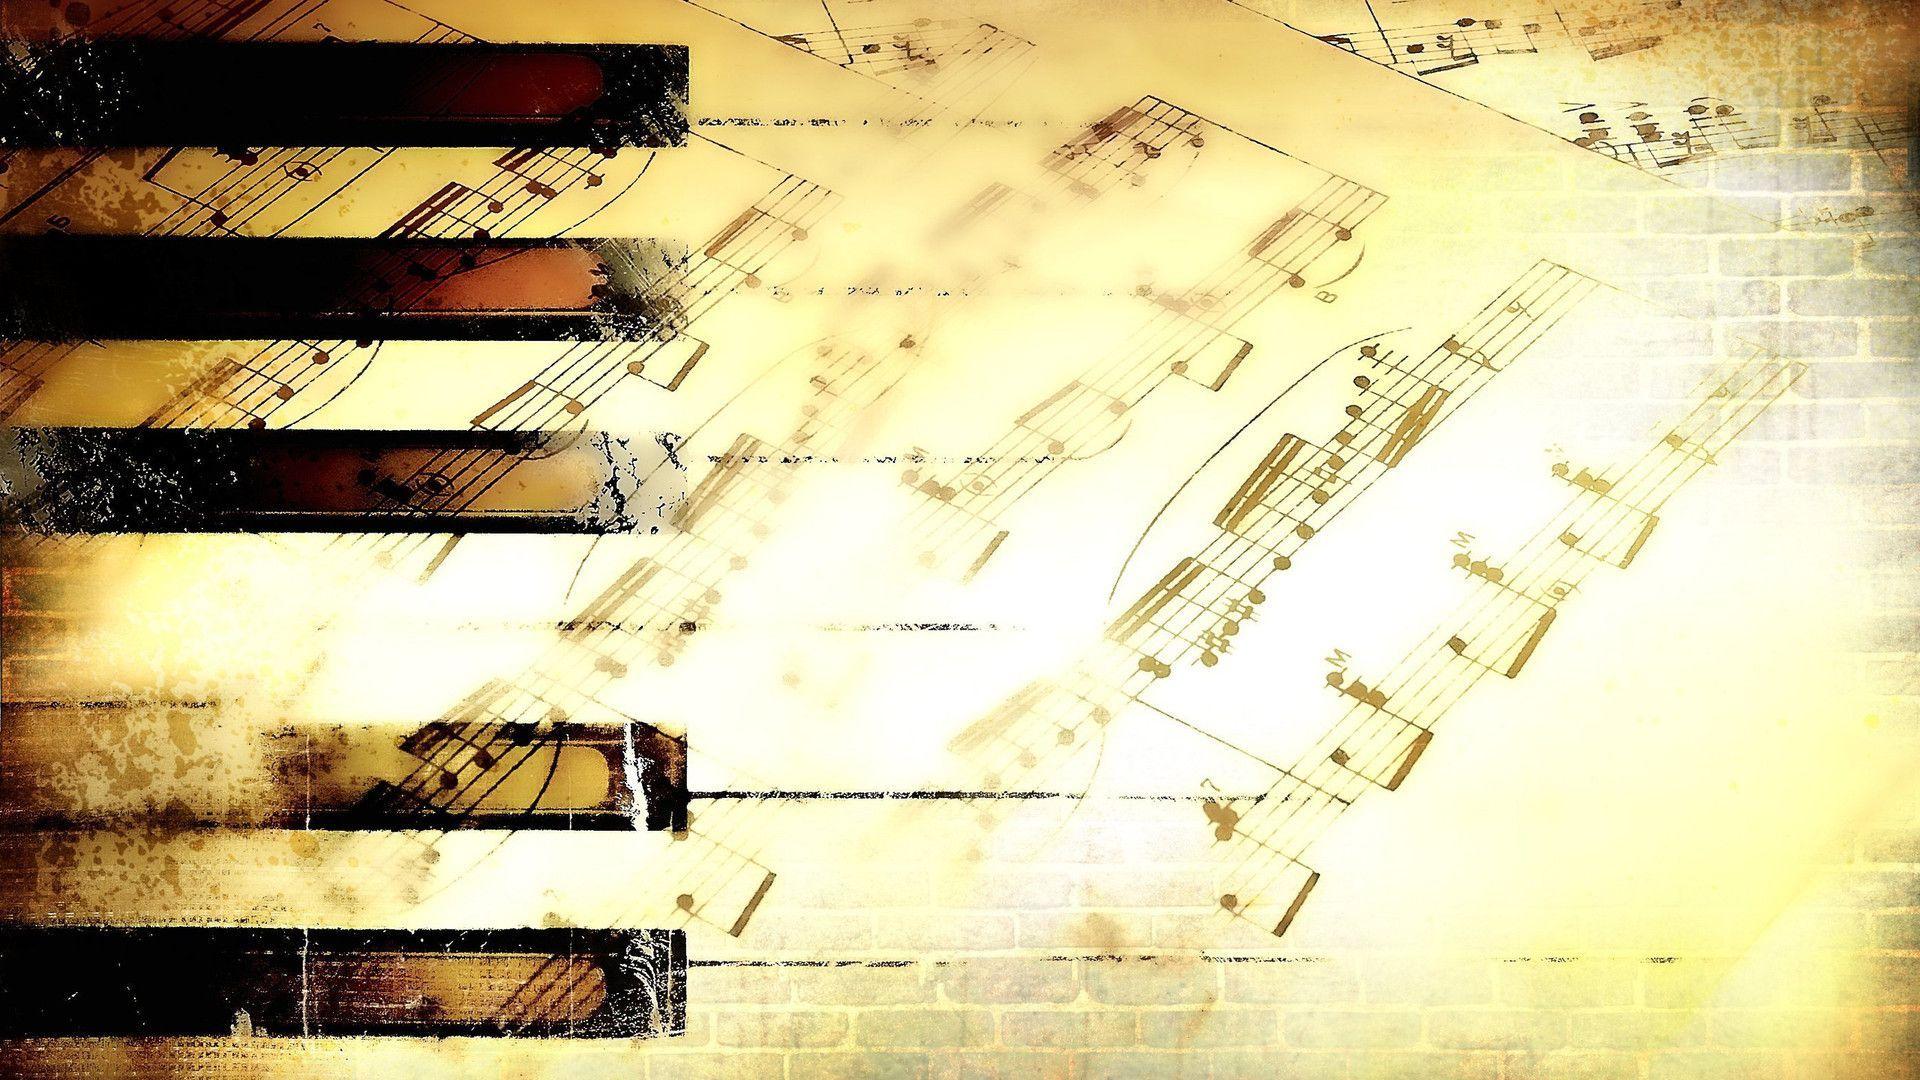 Wallpaper Music Note Notes 1920x1080. Music wallpaper, Music background, Music notes